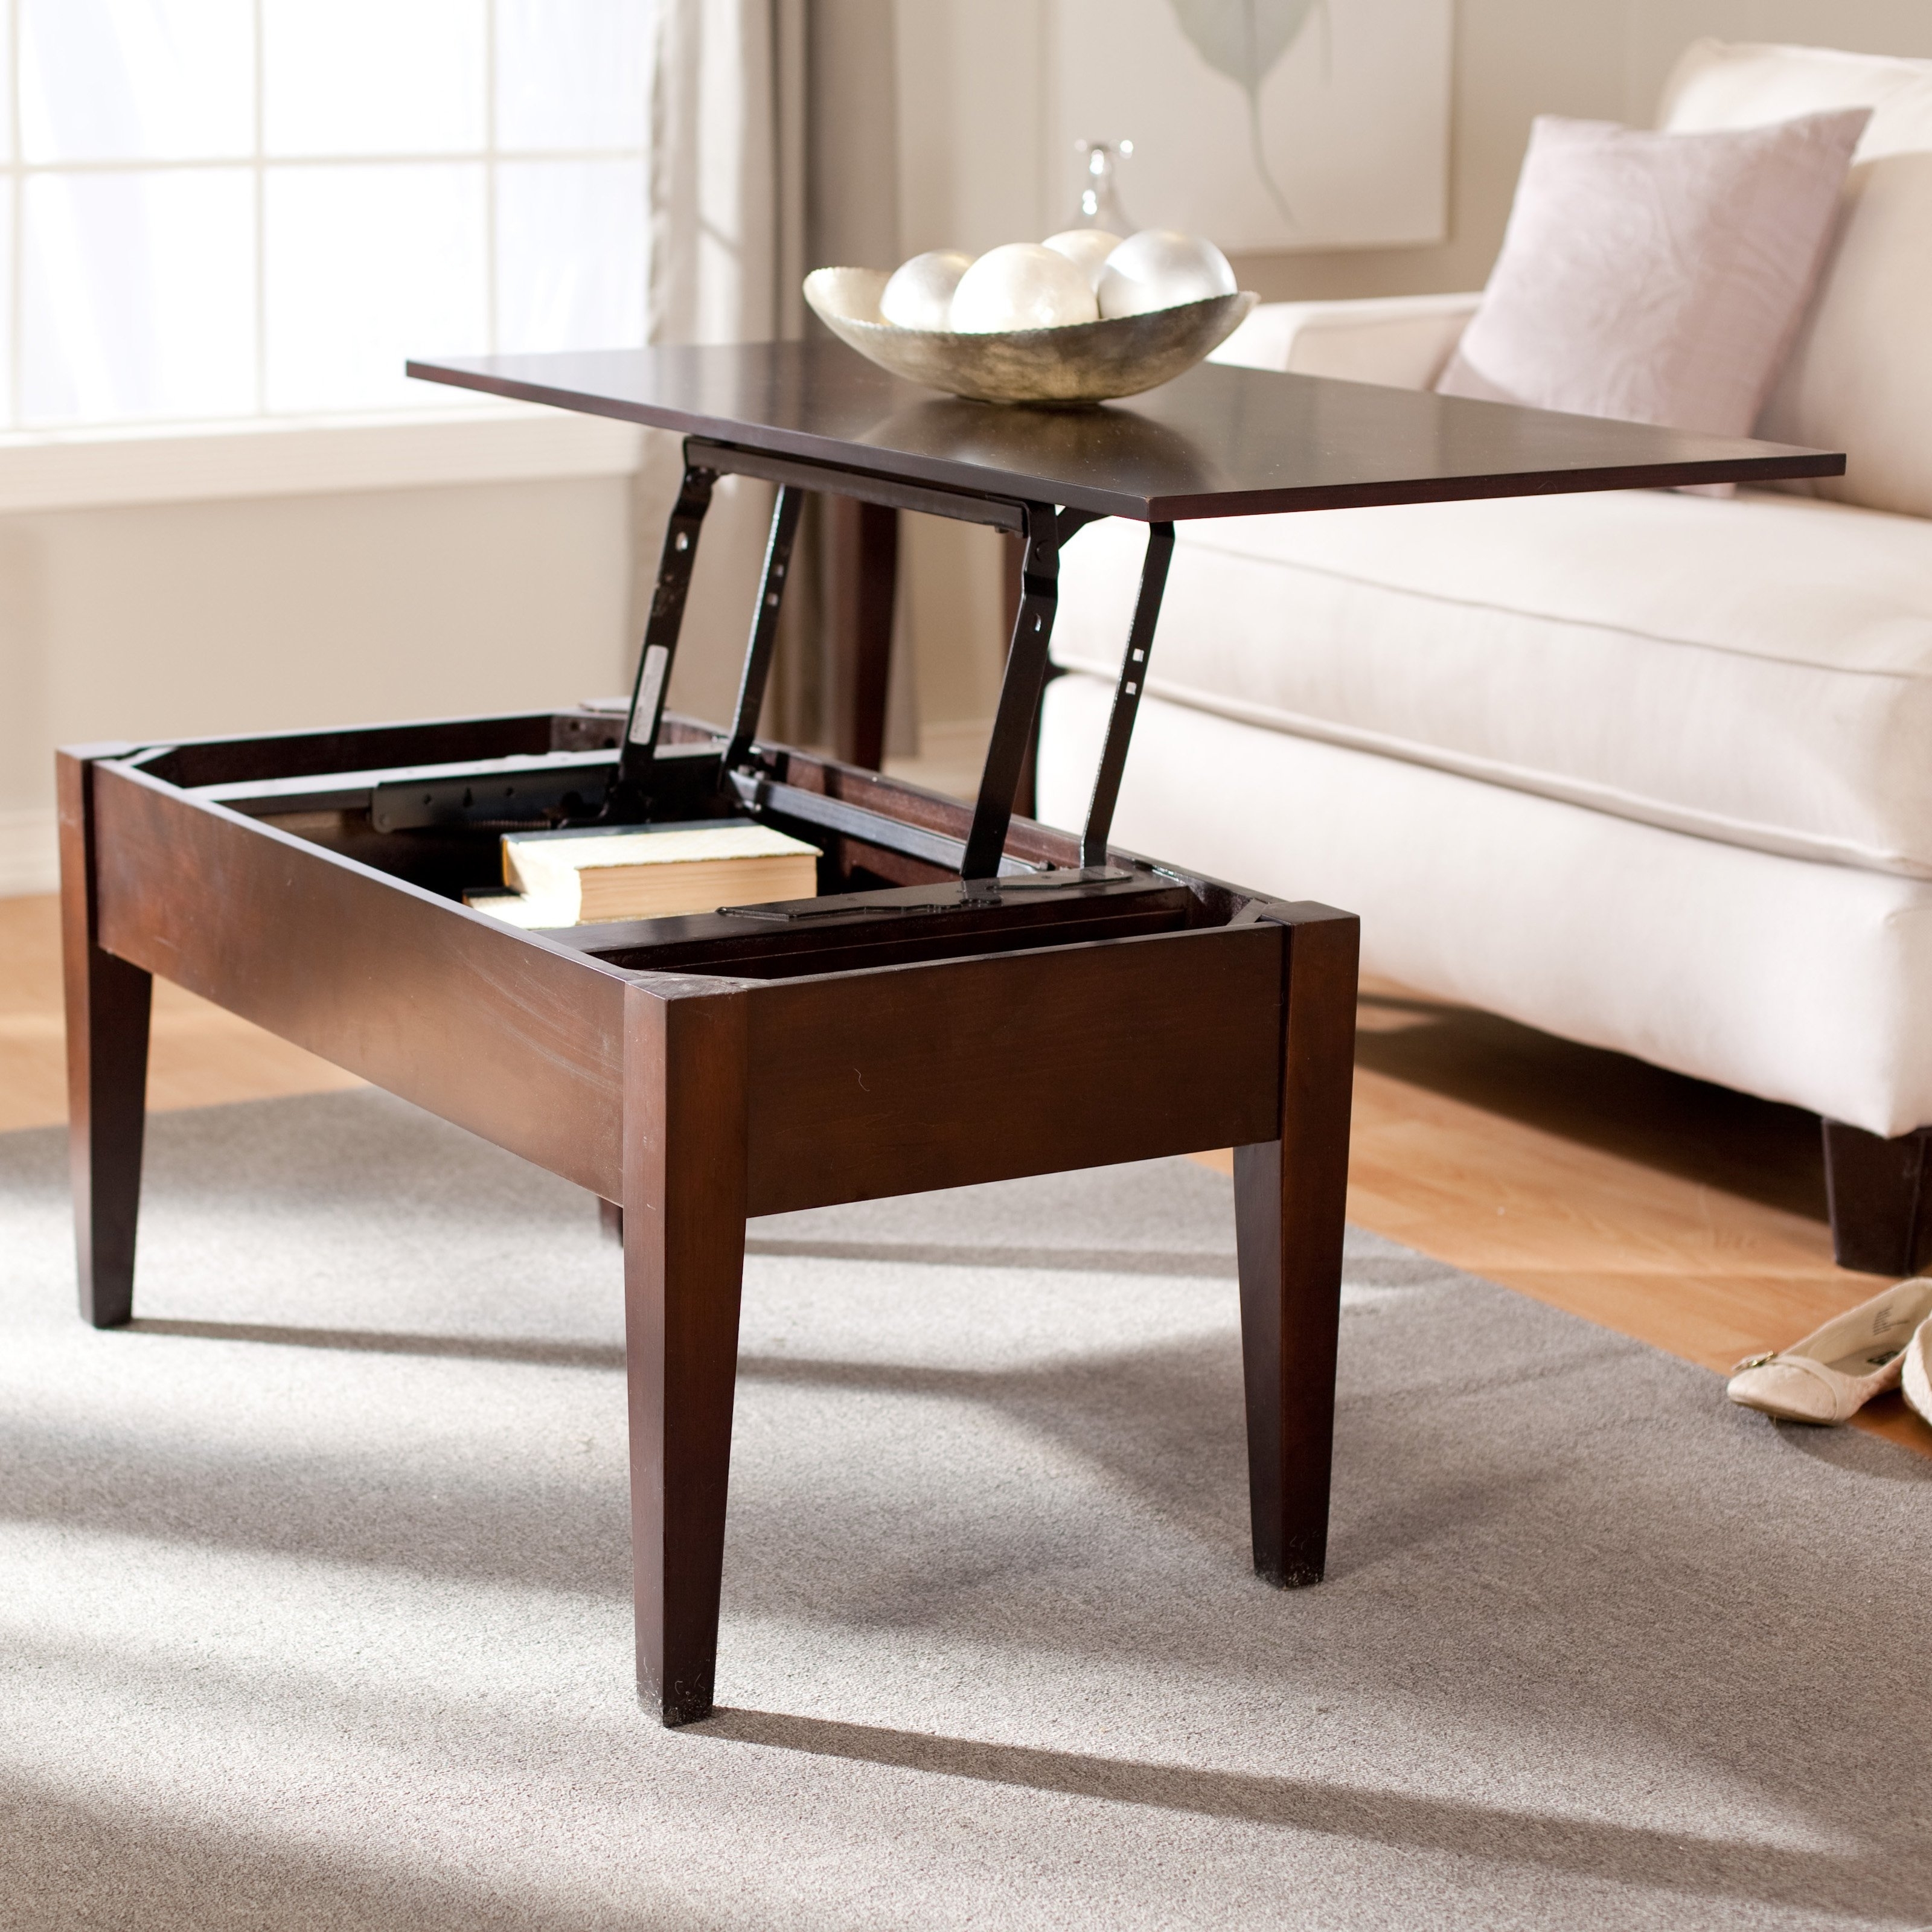 best coffee tables for small spaces table space end rooms ashley furniture sofa reviews large side lamps universal brand big lots hours oak with drawer espresso brown multi